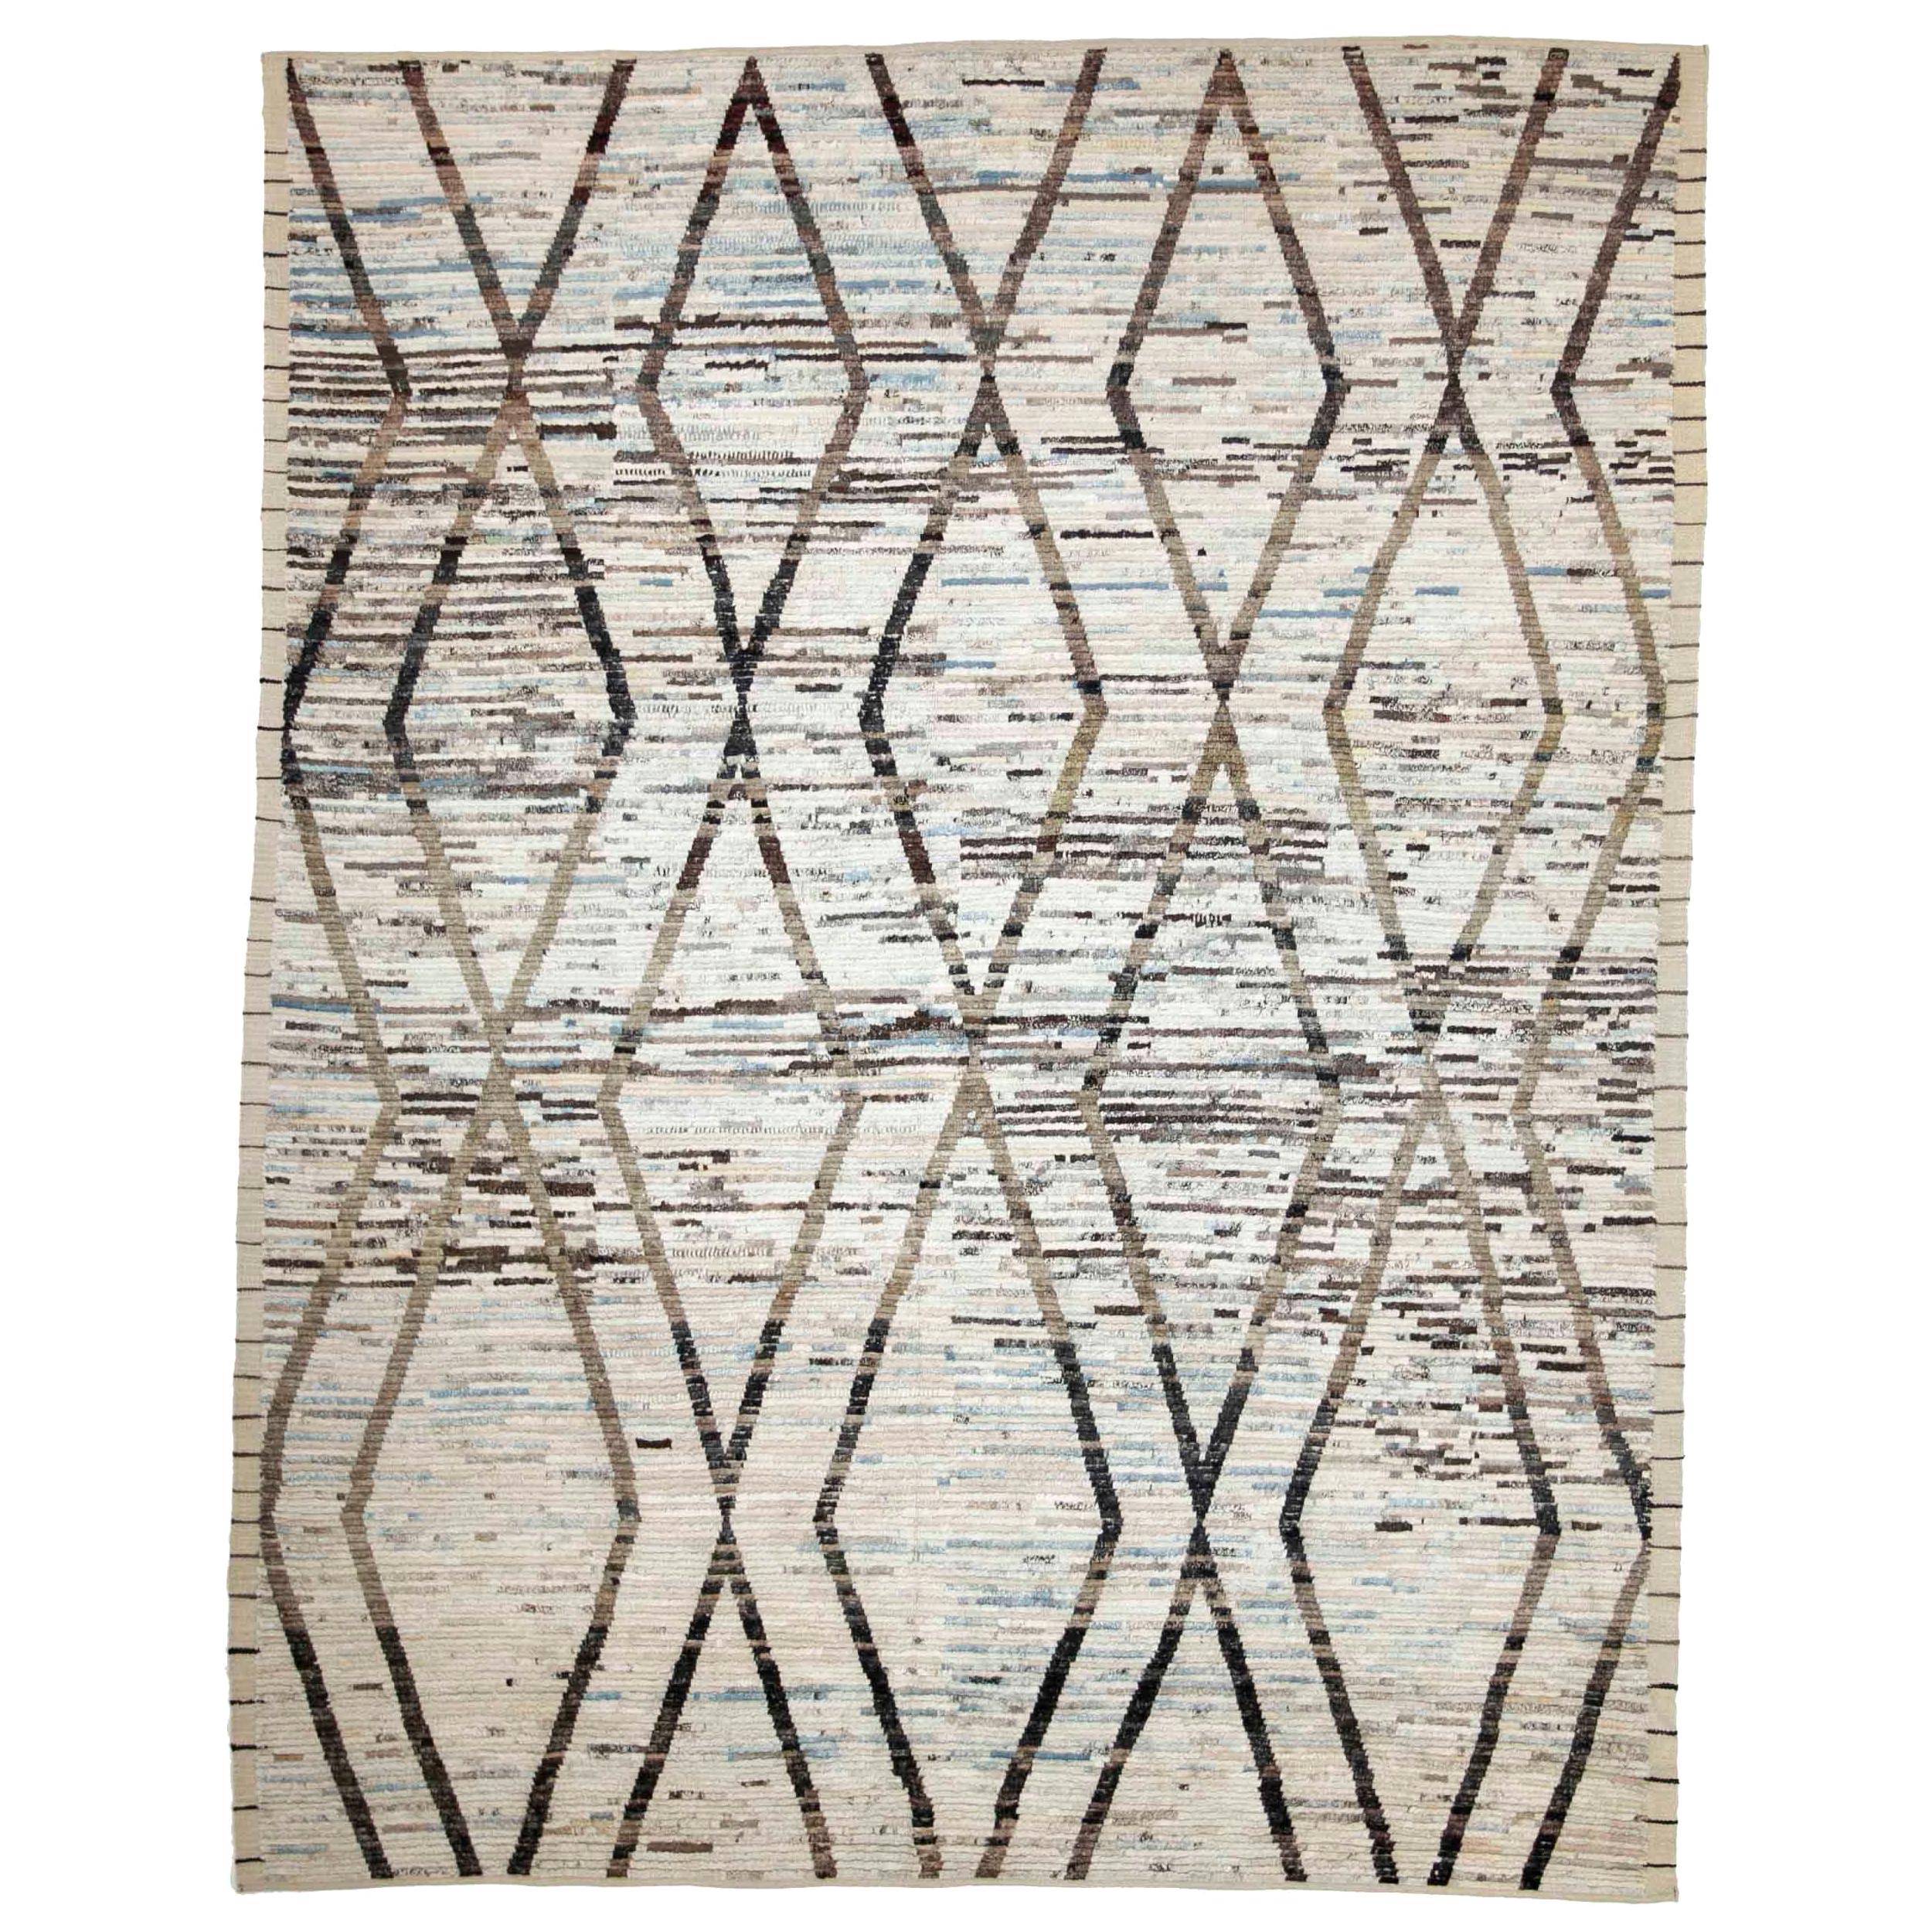 New Afghan Moroccan Style Rug with Black and Brown Tribal Details on Ivory Field